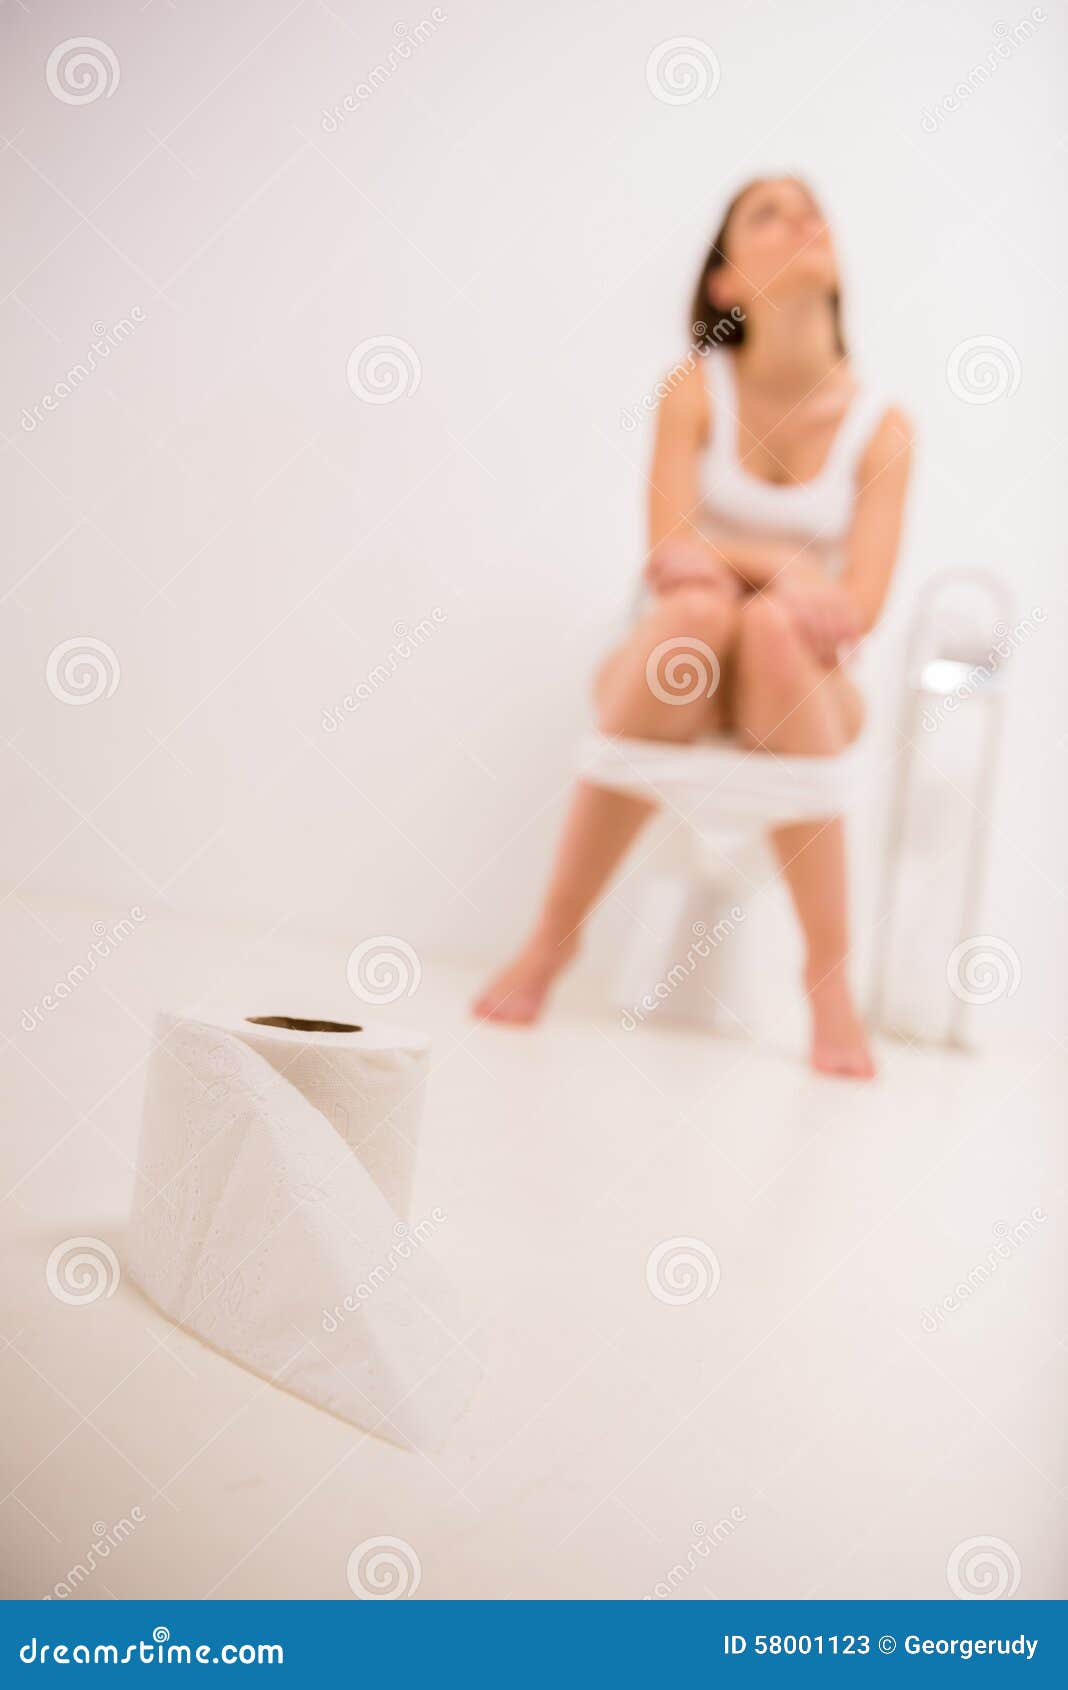 5858 Old Woman On Toilet Images, Stock Photos & Vectors